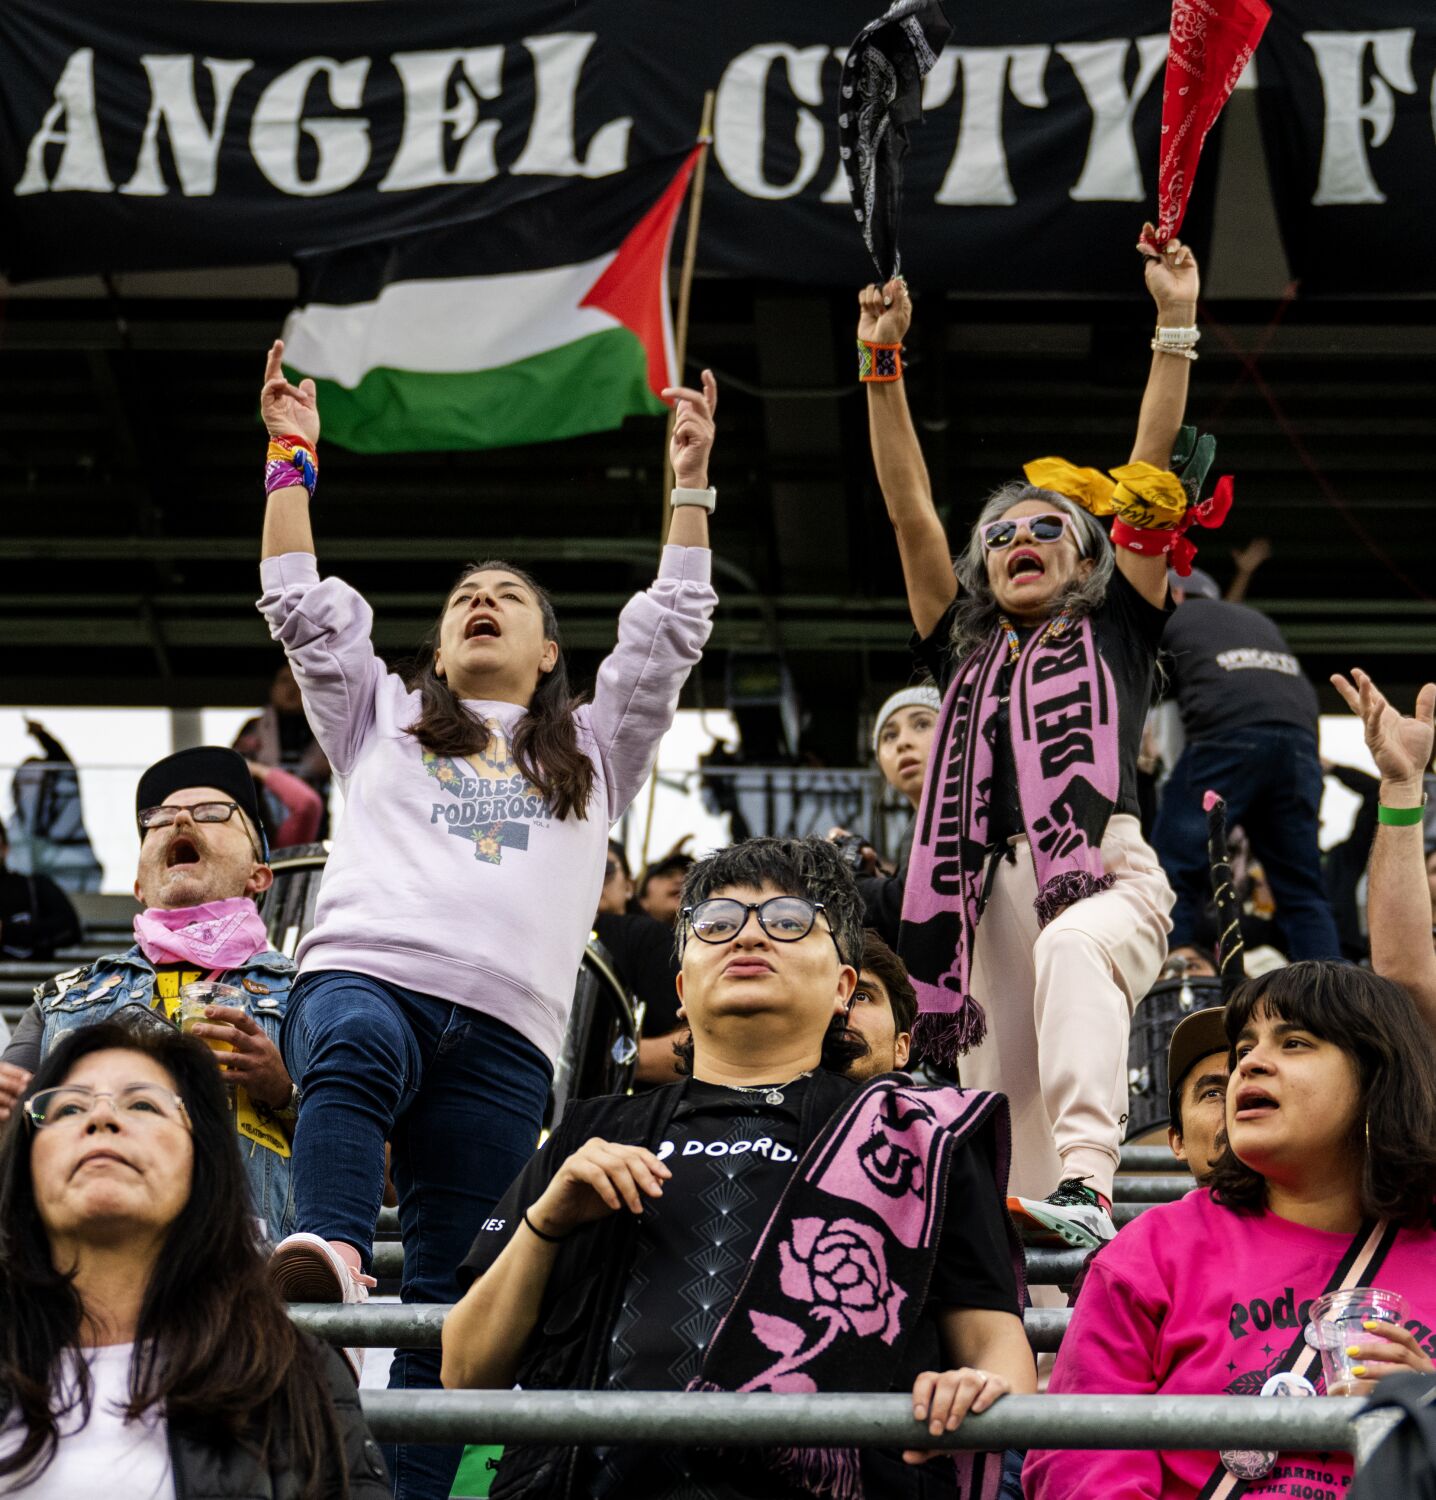 Pink capes, wigs and no slurs: L.A.'s Angel City and its fans are building an inclusive space 